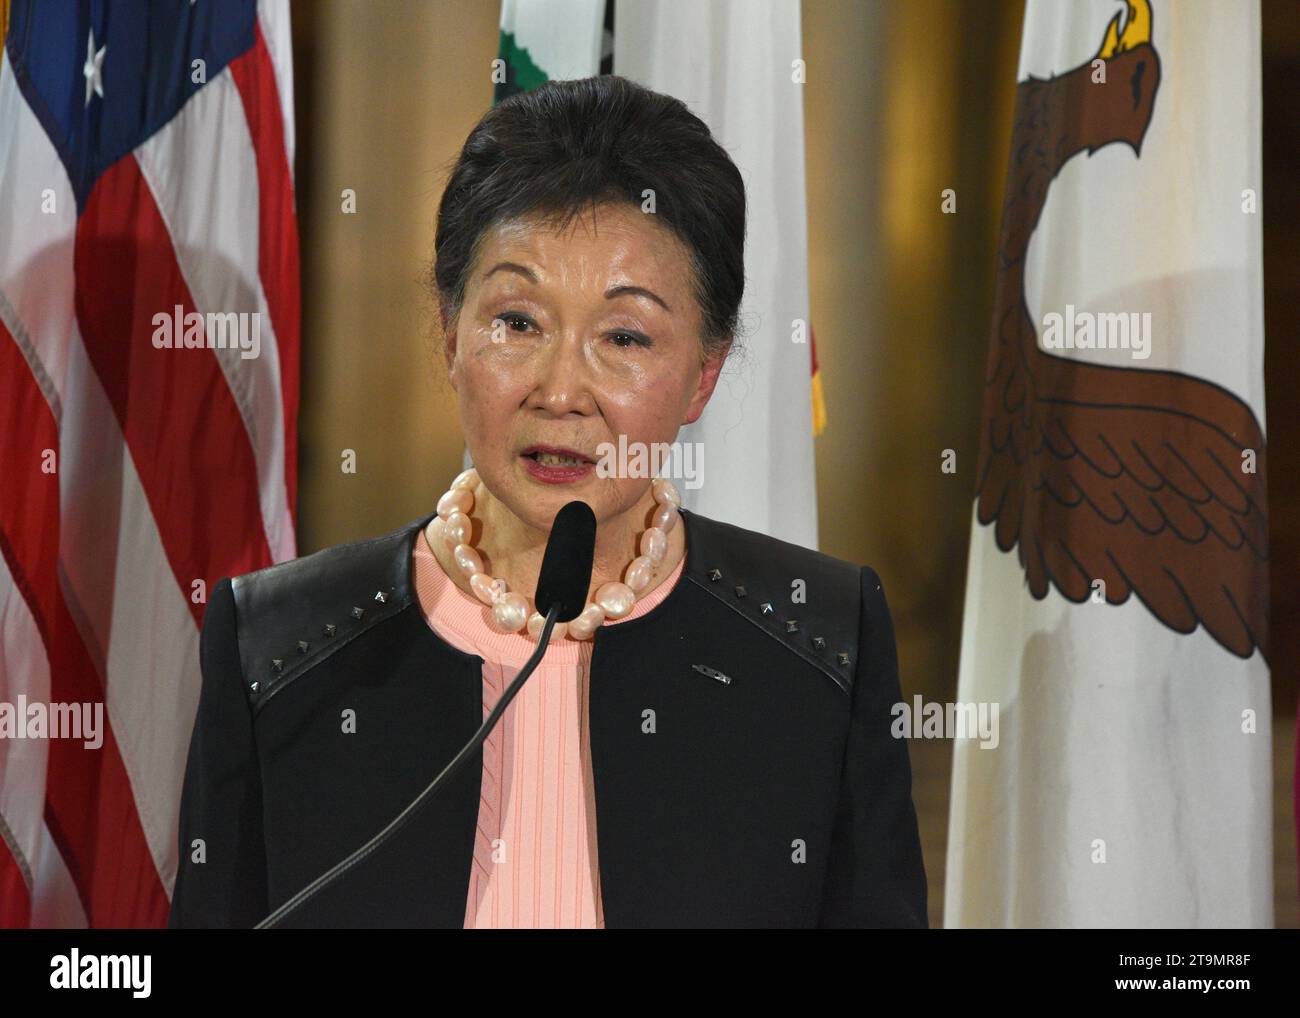 San Francisco, CA - March 8, 2023: Florence Fang, Chairwoman of the Florence Fang Family Foundation, speaking at the International Women’s Day Women's Stock Photo